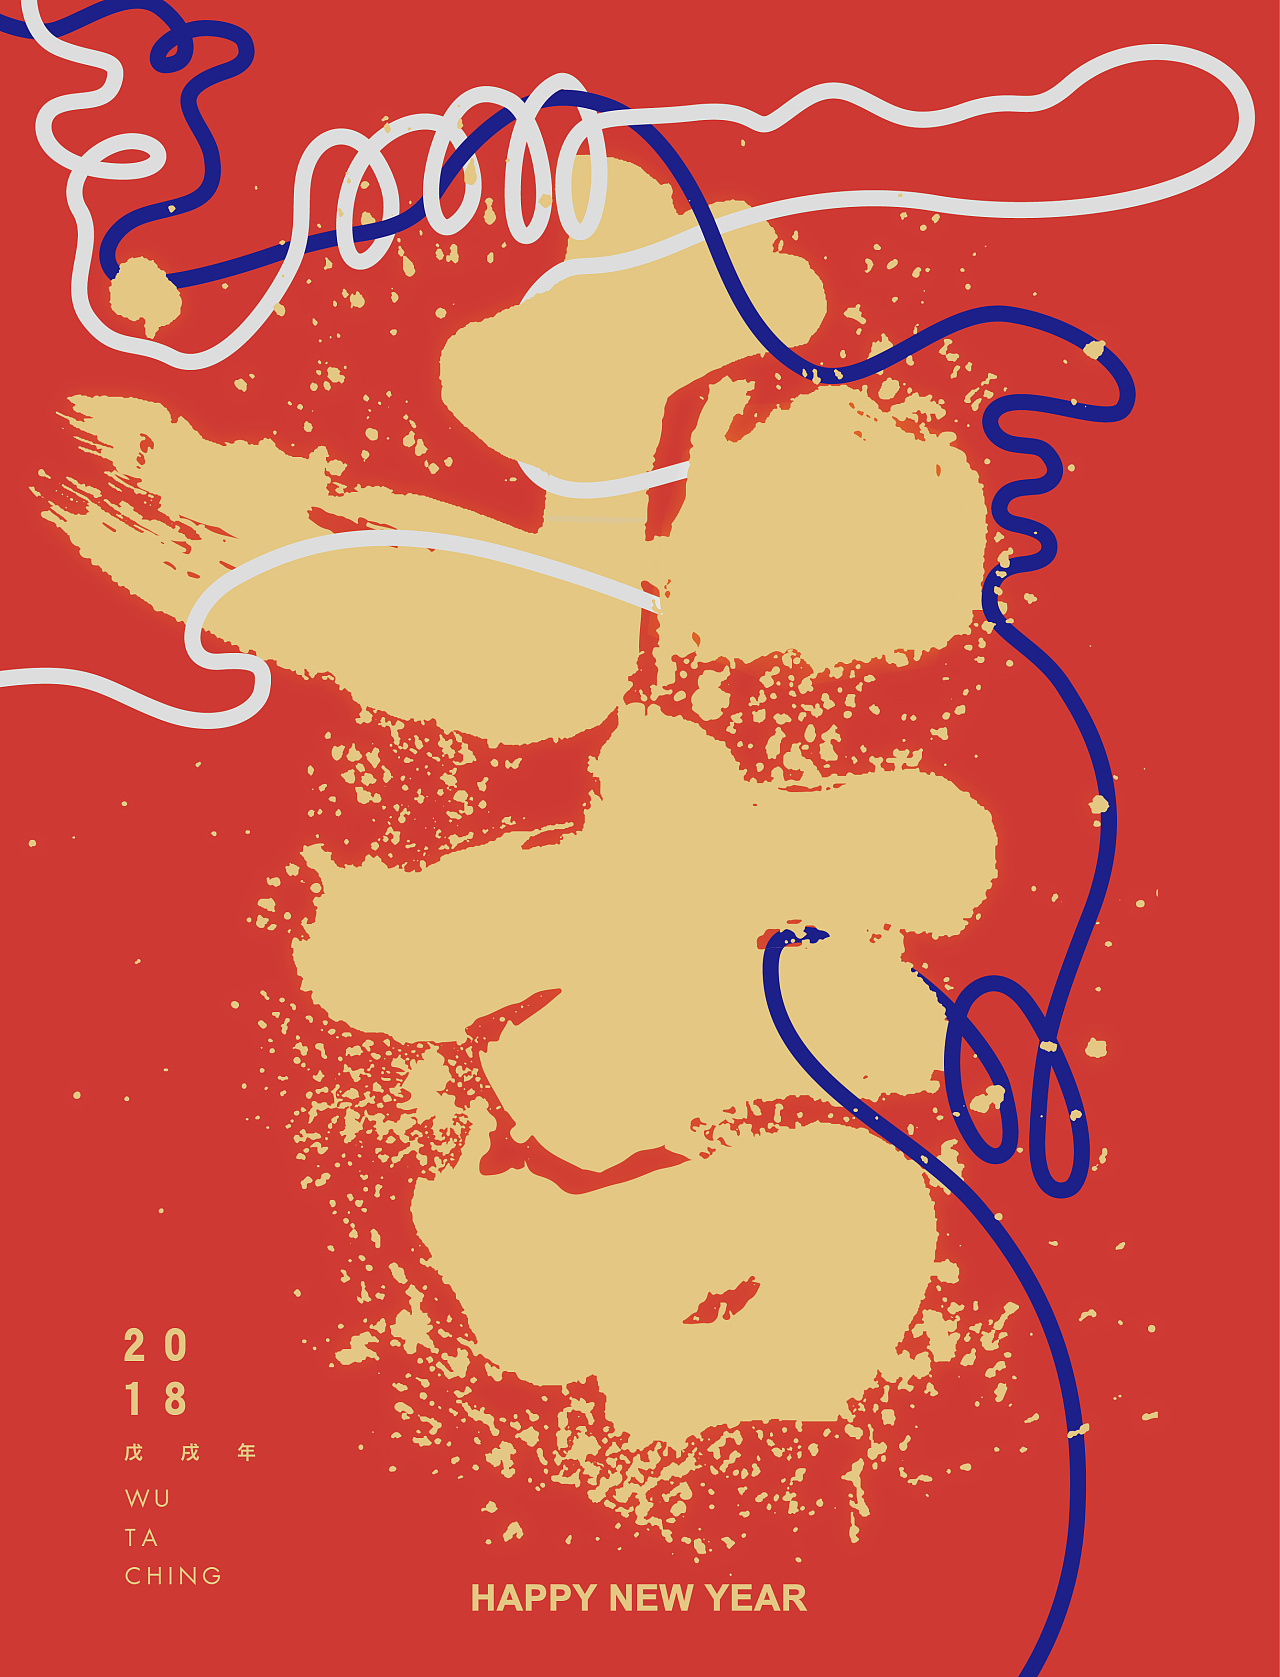 8P Summer passion Chinese font art